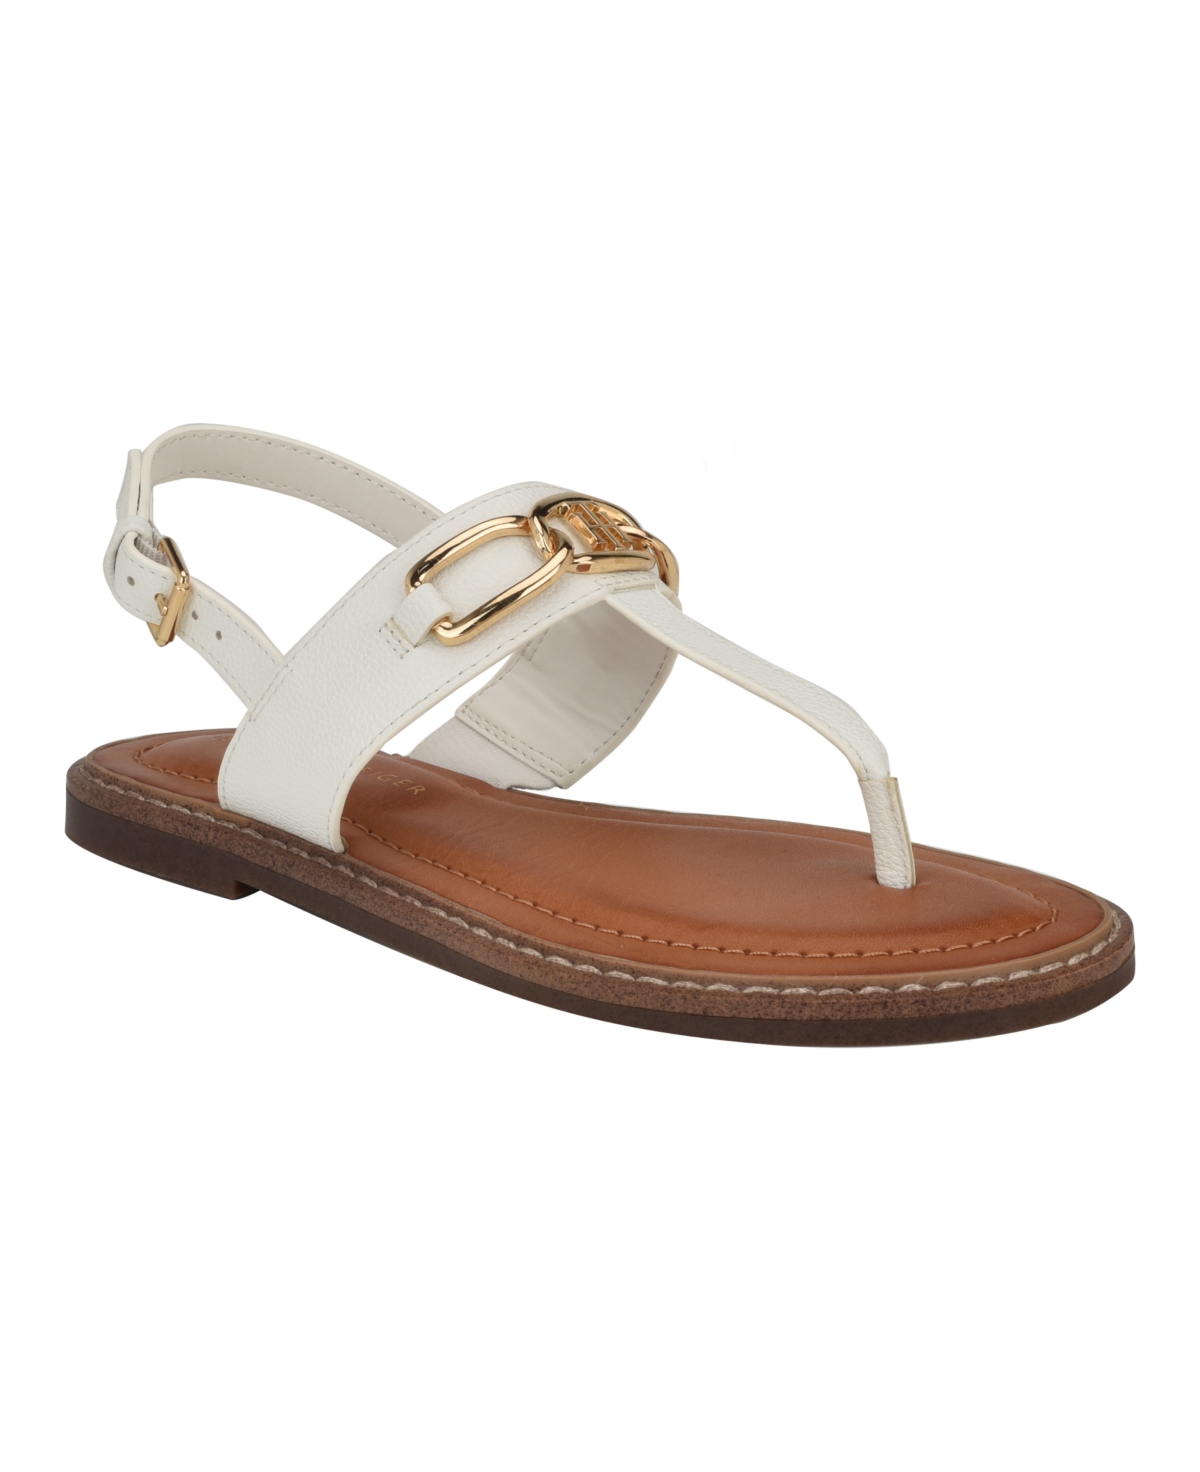 Women's Brontina Flat Thong Sandals with Hardware - White